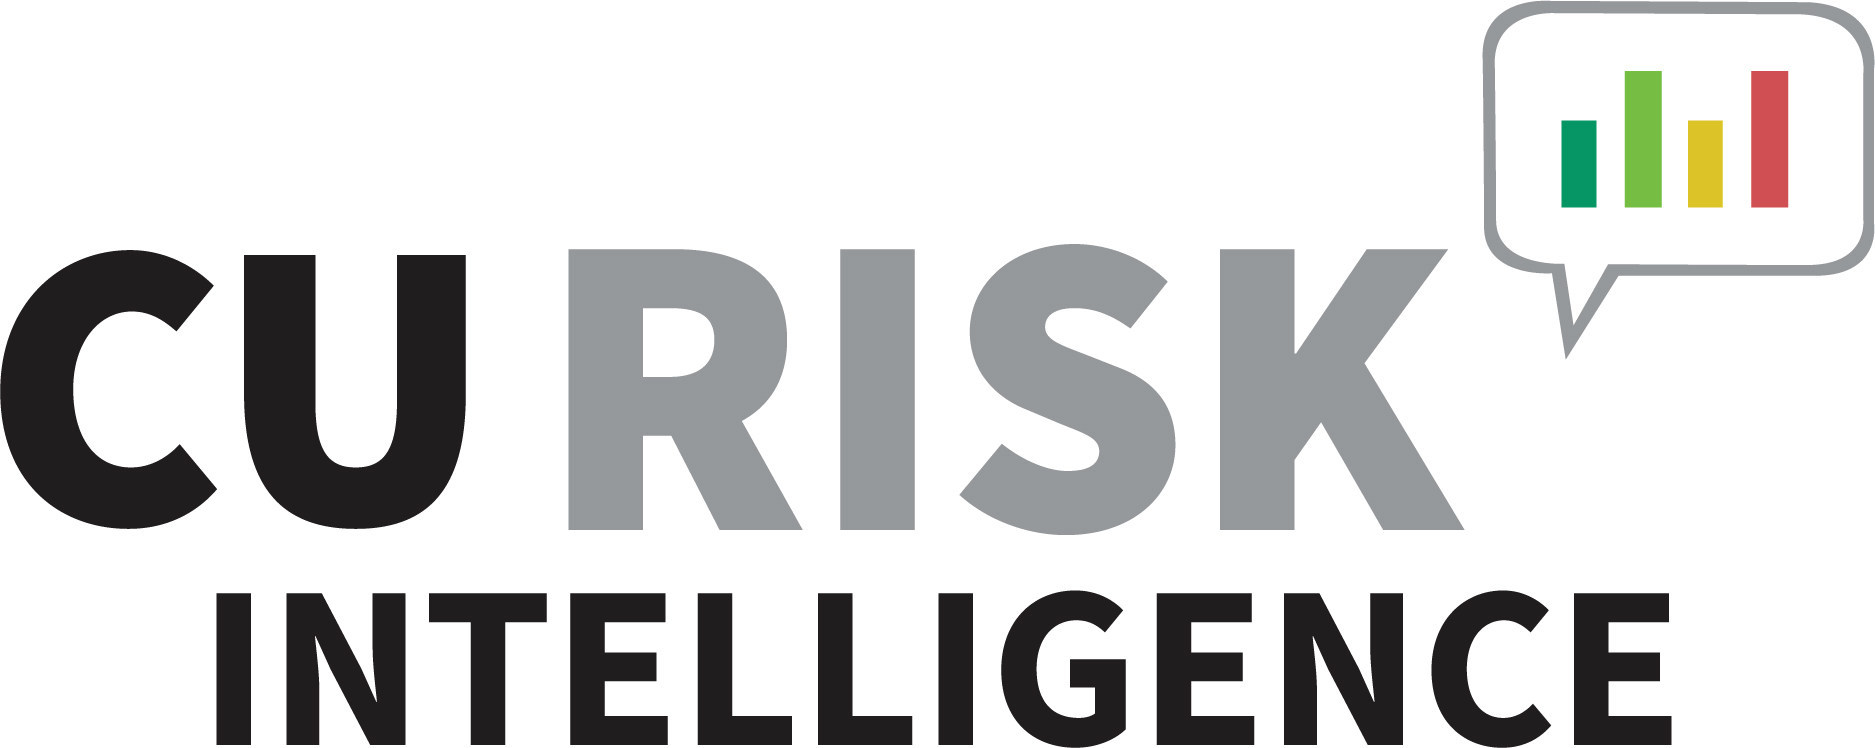 Introducing CU Risk Intelligence: a credit union system company committed to offering governance, risk and compliance solutions in partnership with state leagues